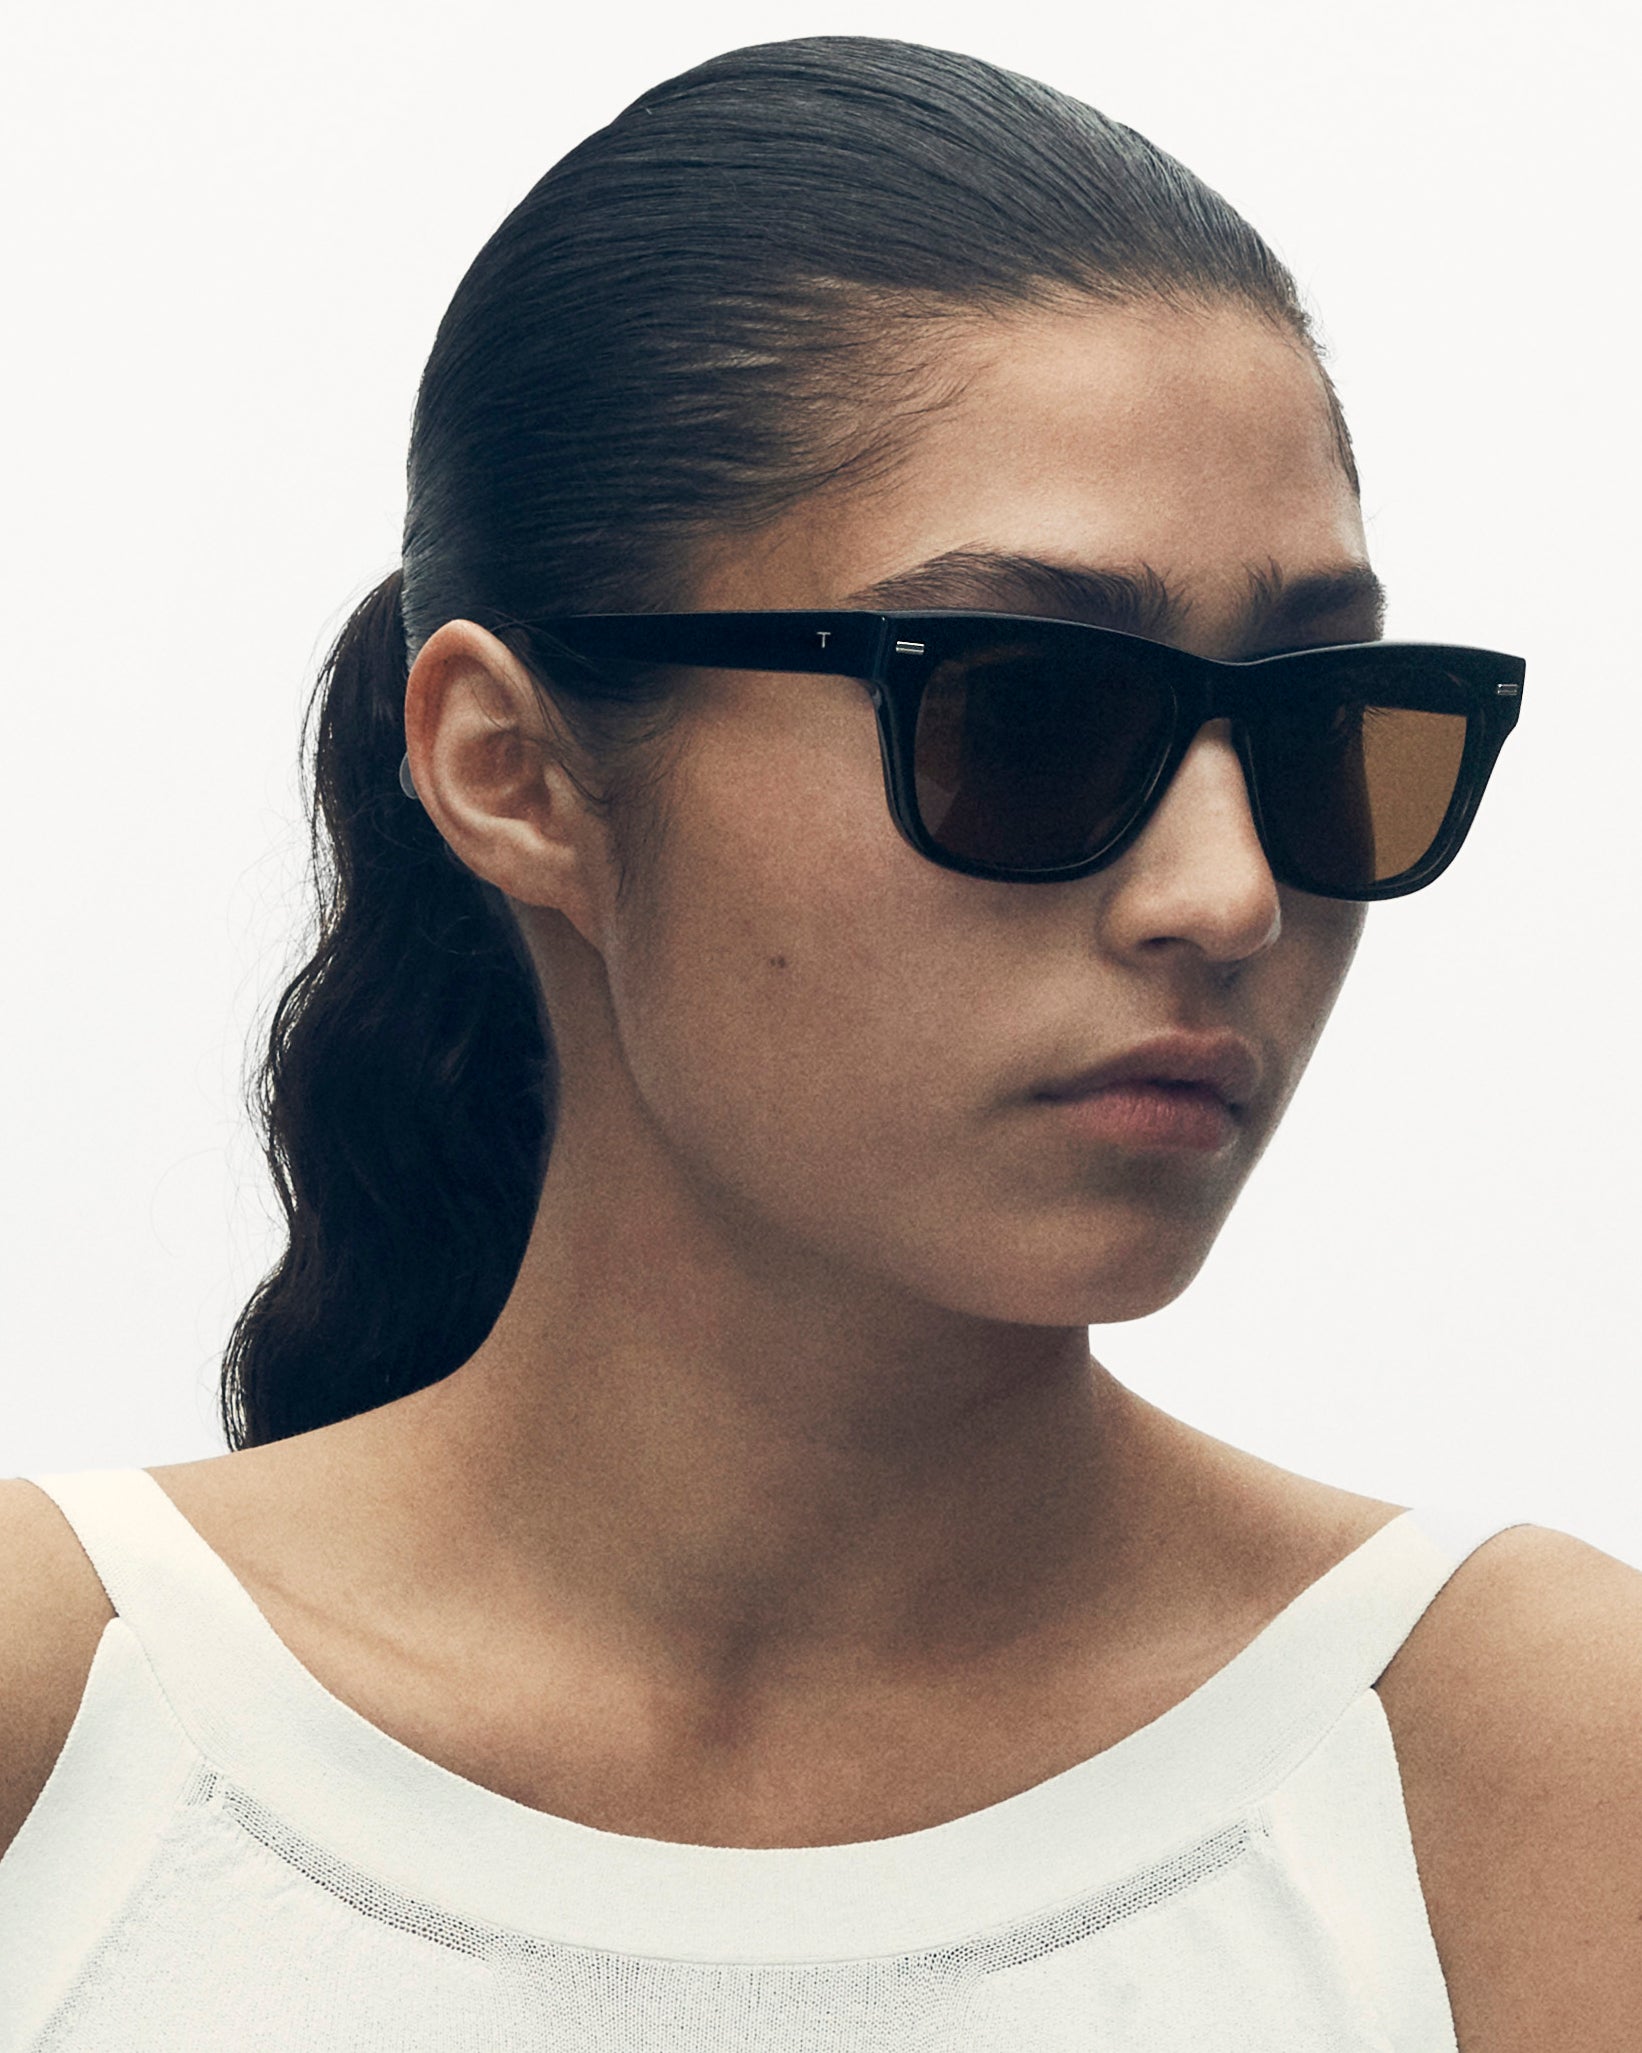 model wearing sunglasses. she is looking off to the side.